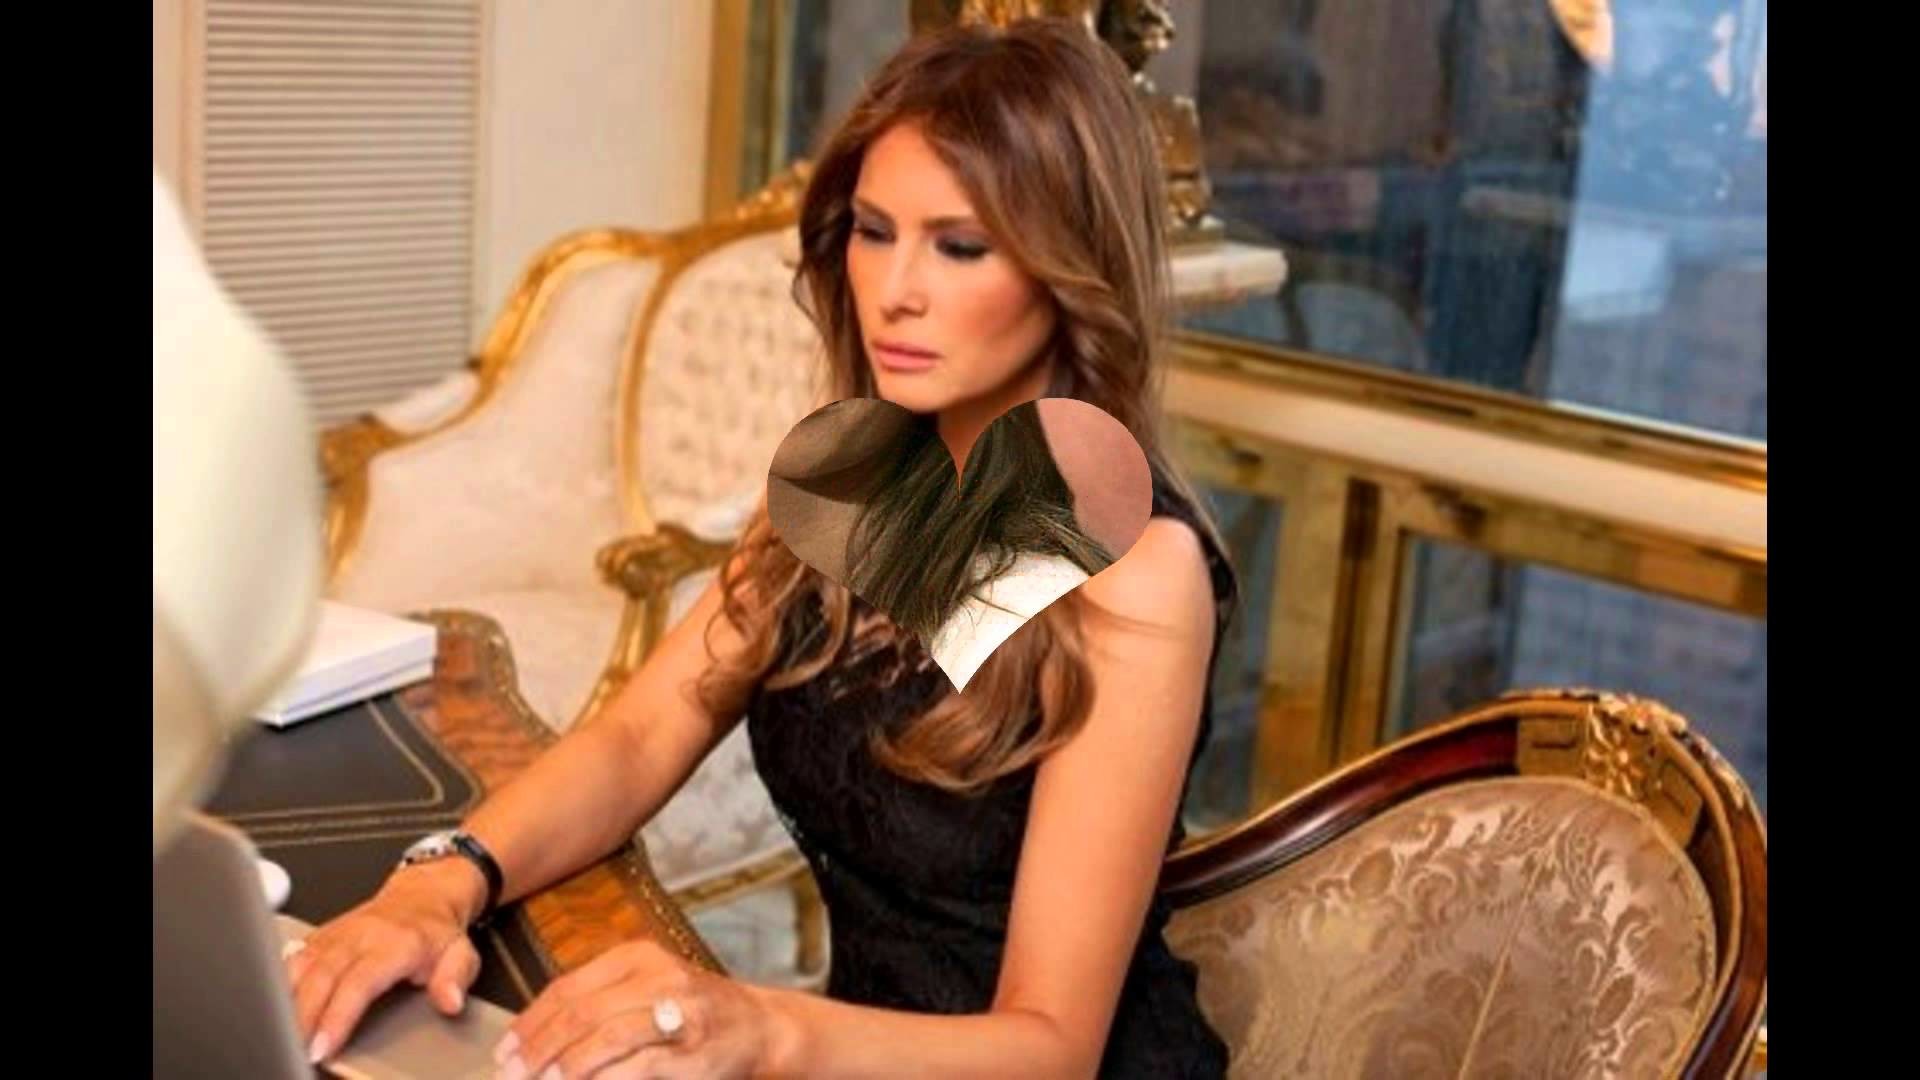 Donald Trump and Model Melania Trump Modeling Could Be Help Trumps Compaign